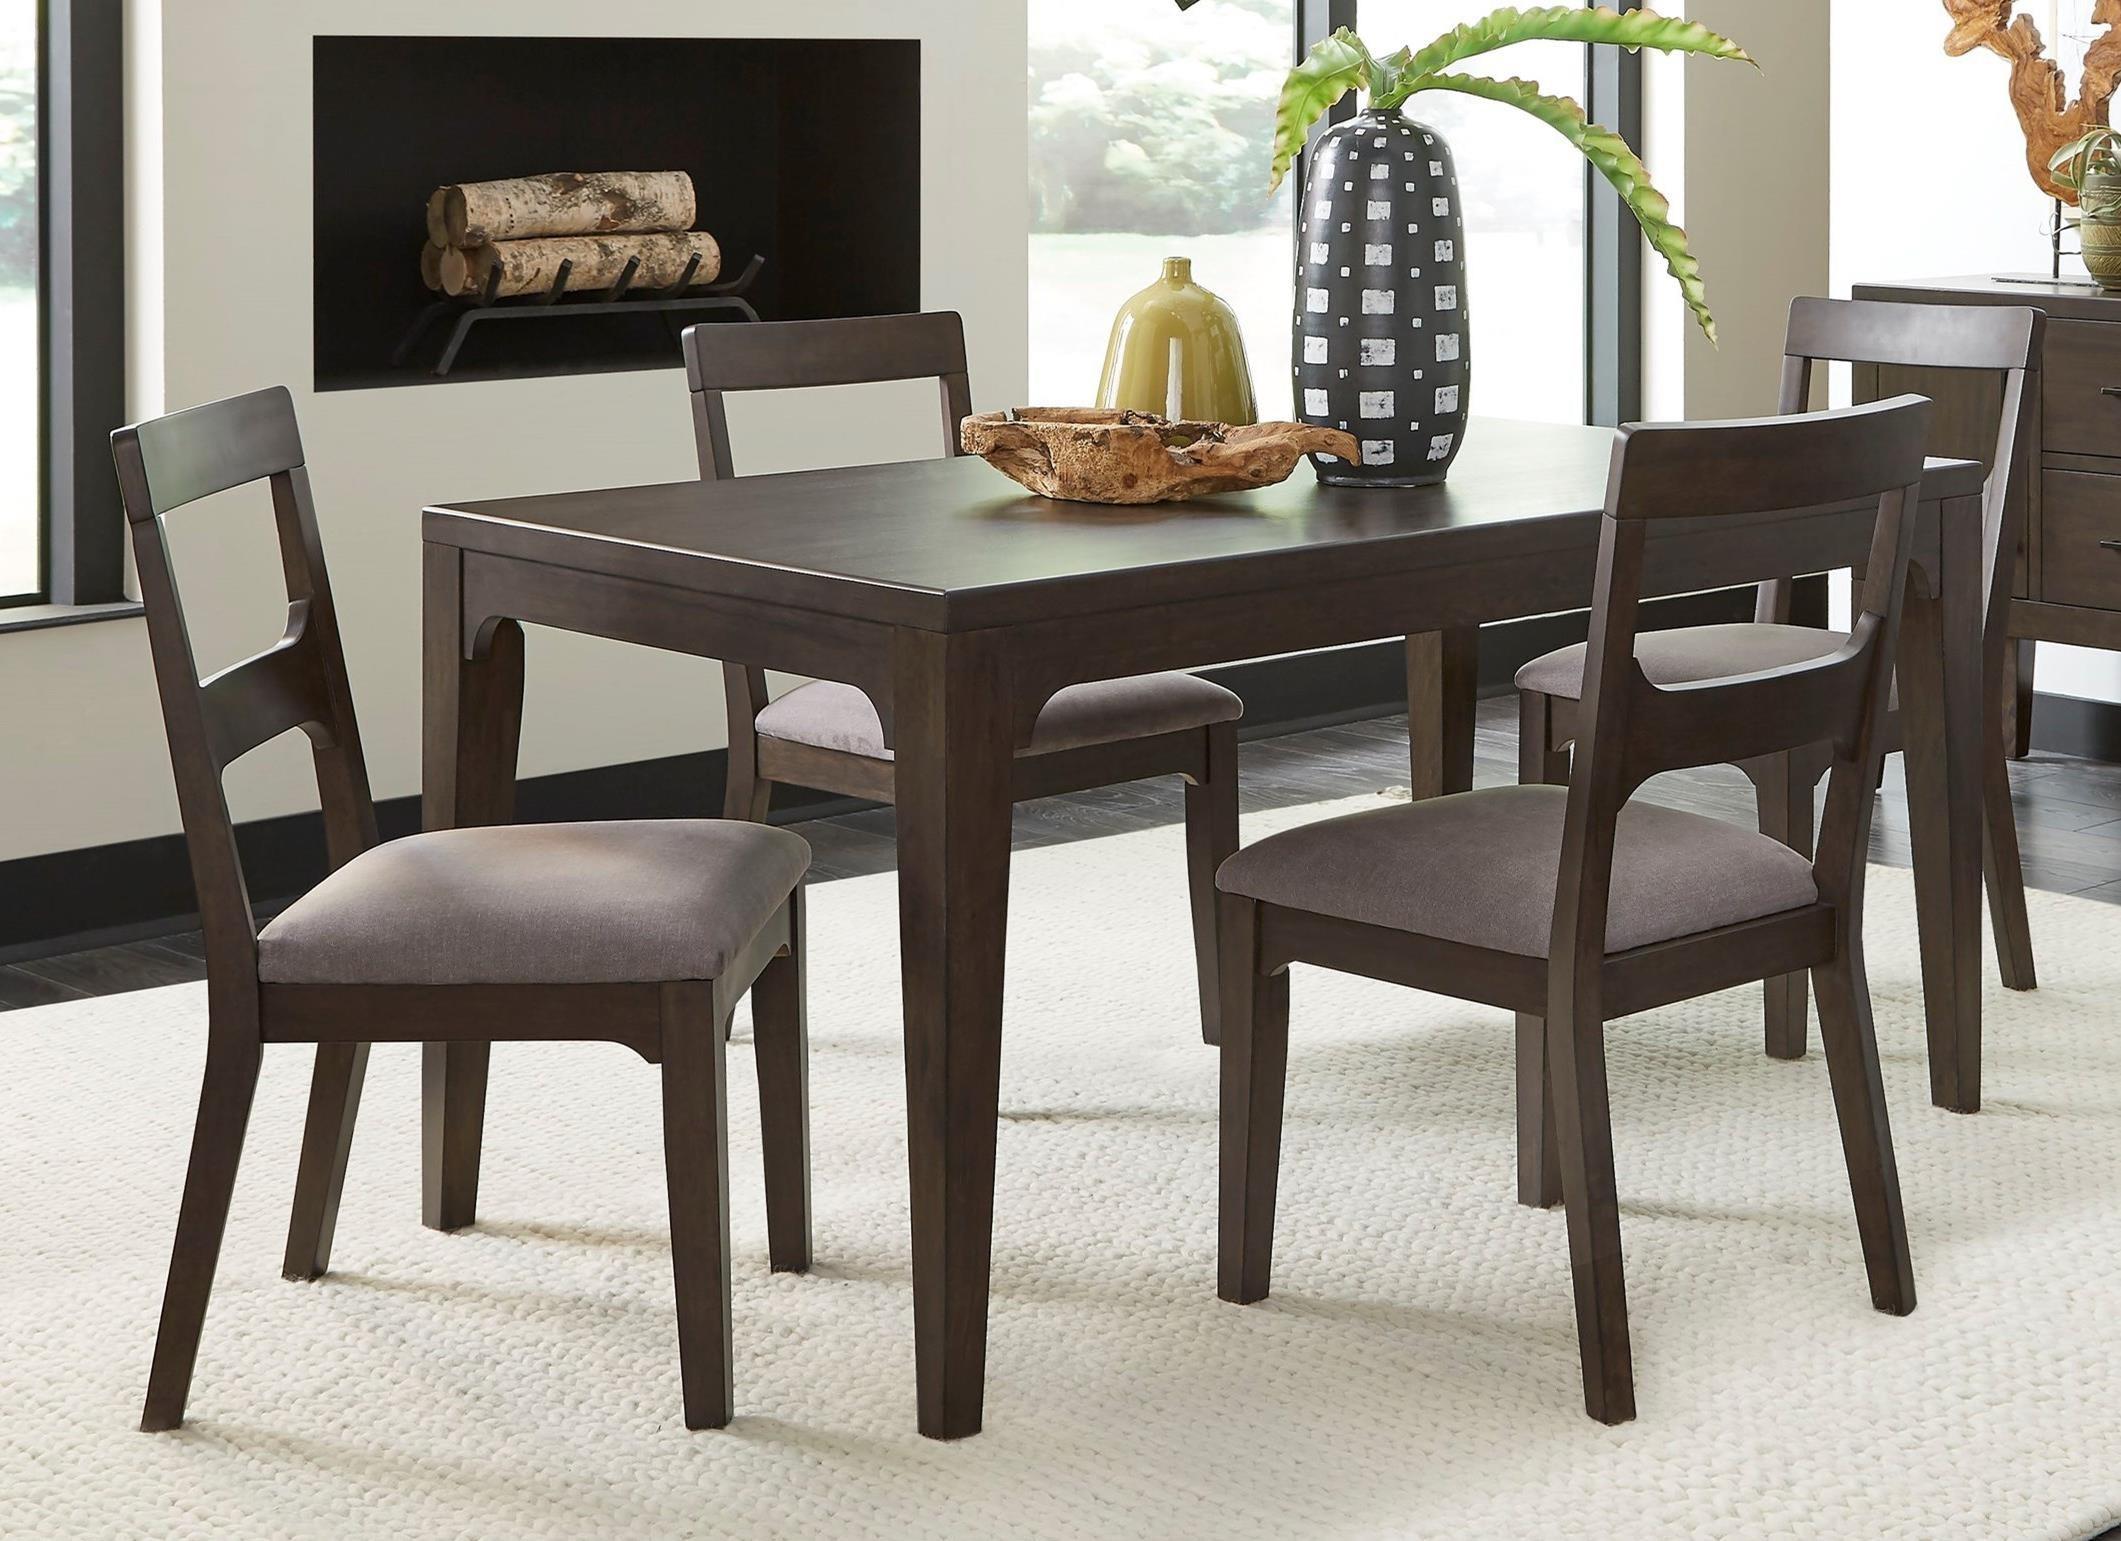 

    
GNCU60 Brown Horse Finish Mid-century Style Dining Table BRYCE by Modus Furniture
